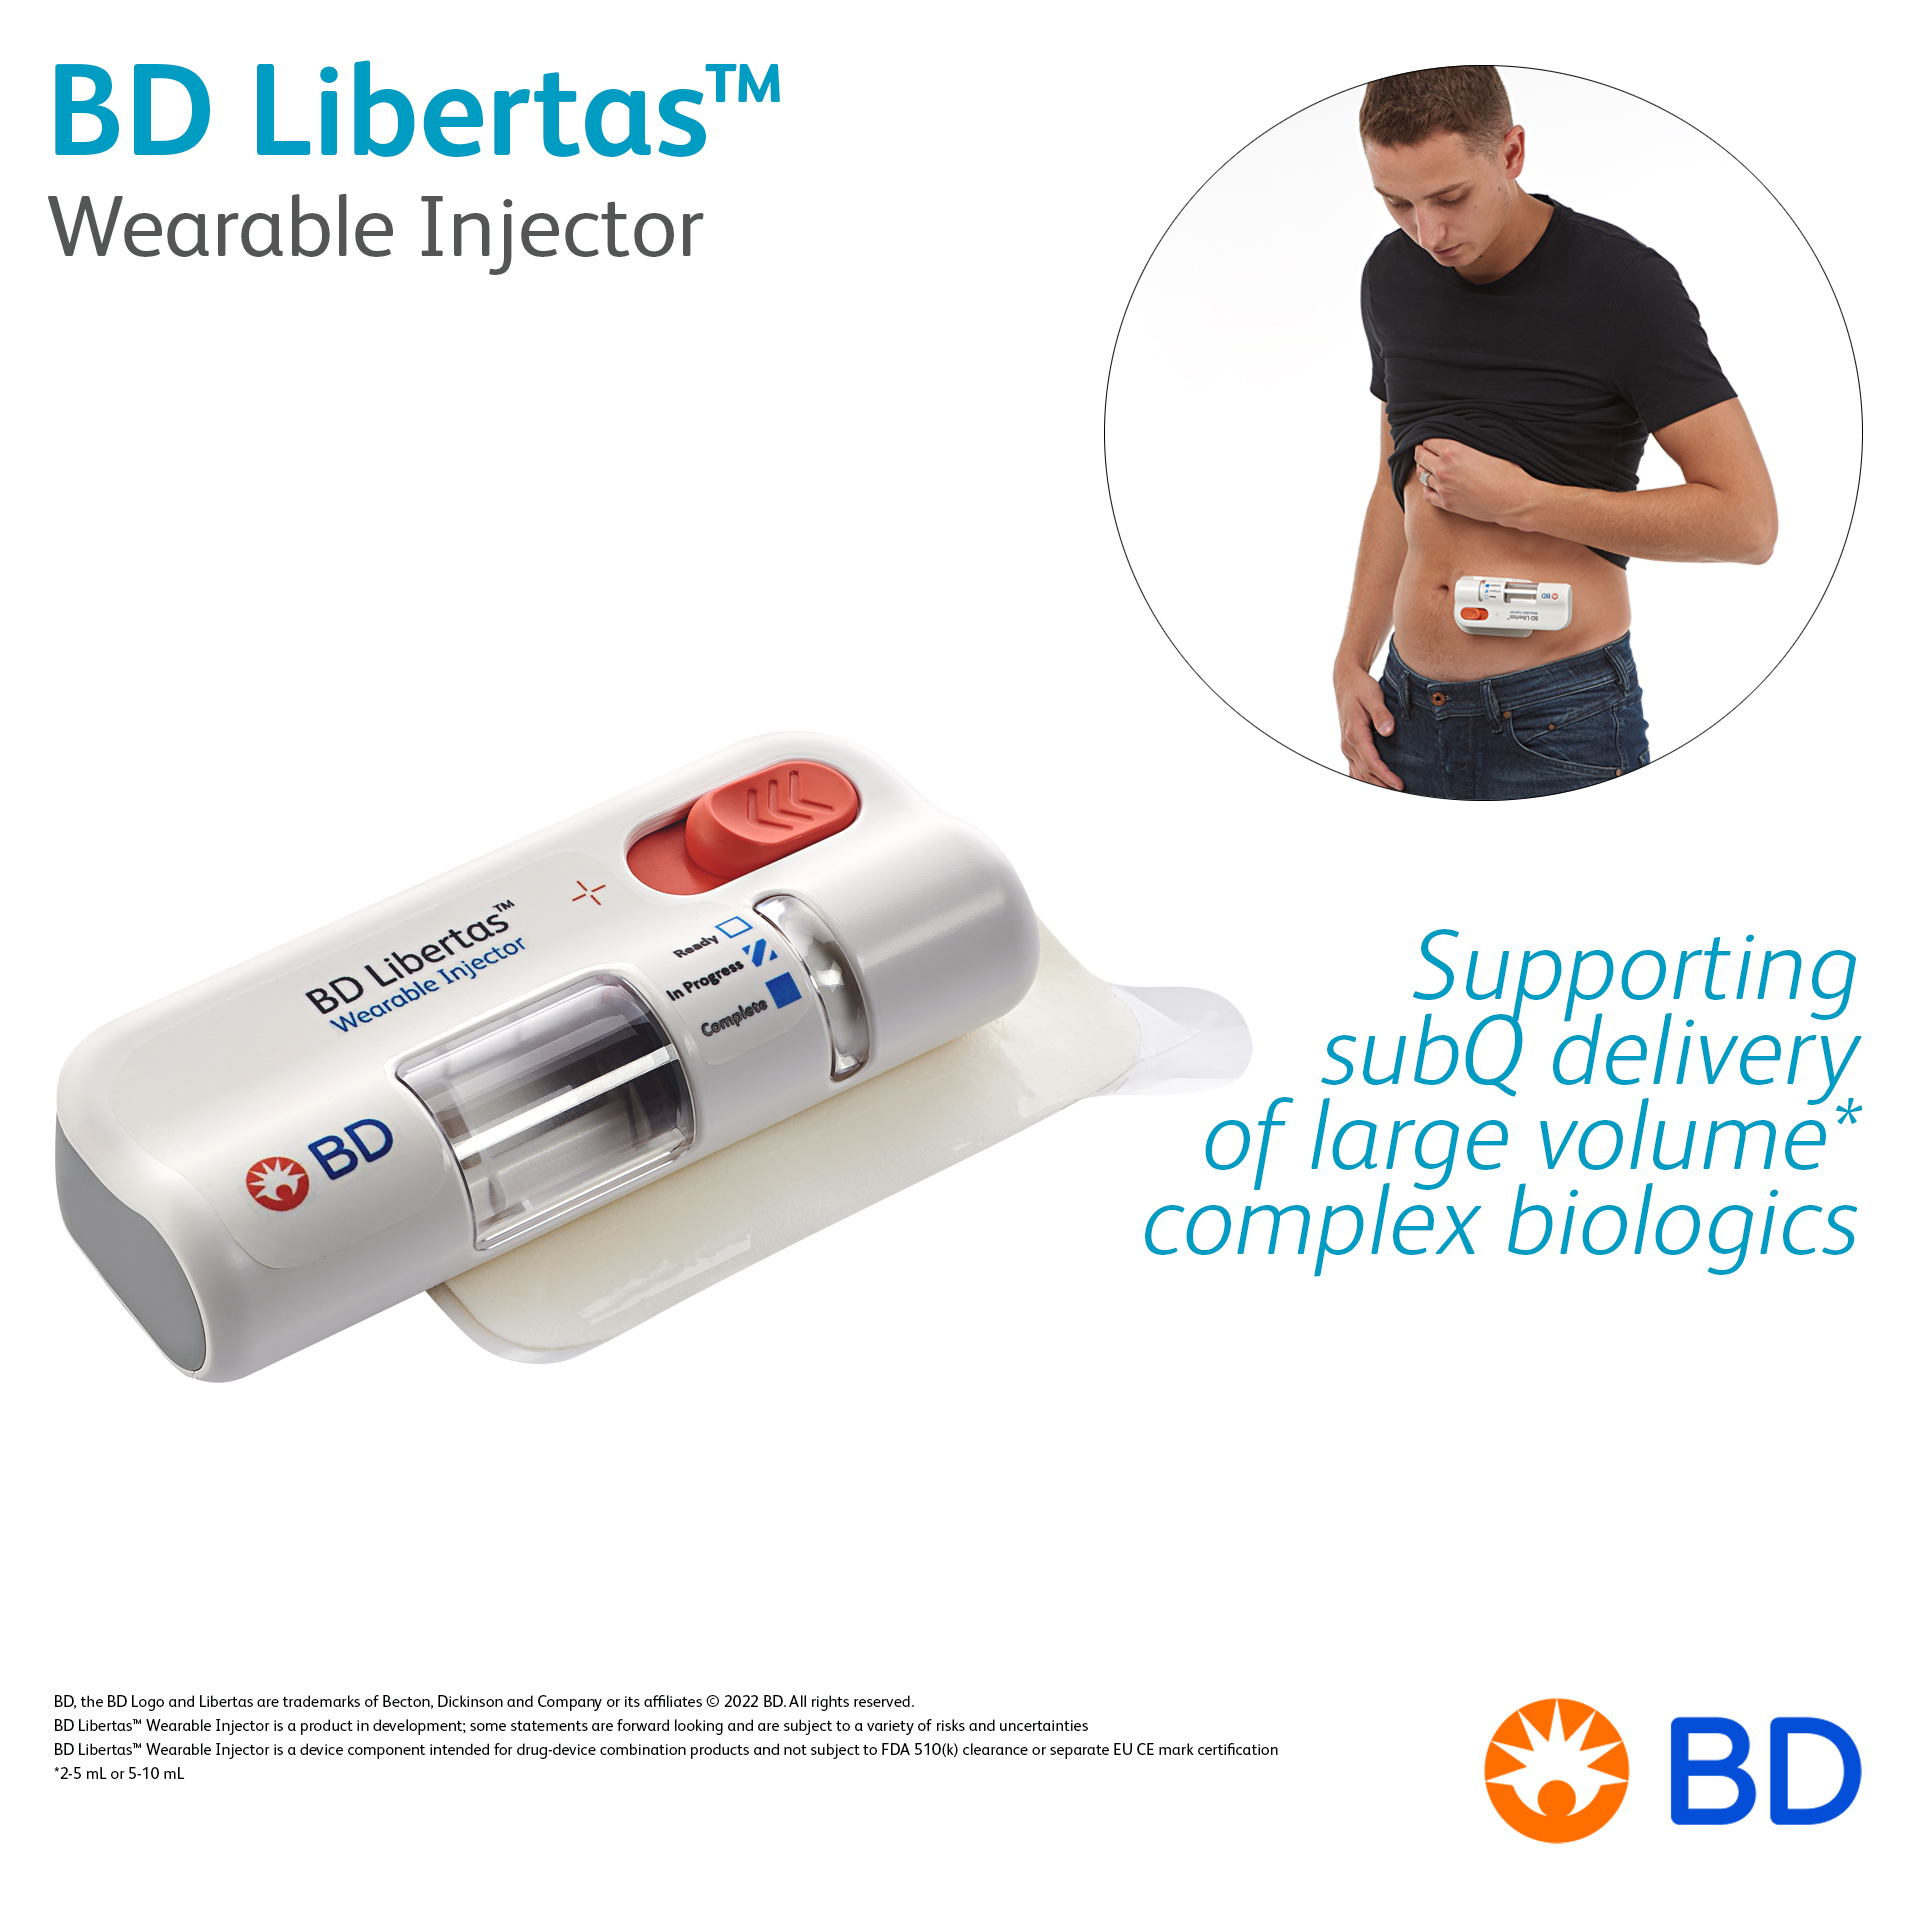 BD Libertas™ Wearable Injector - Supporting subQ delivery of large volume complex biologics